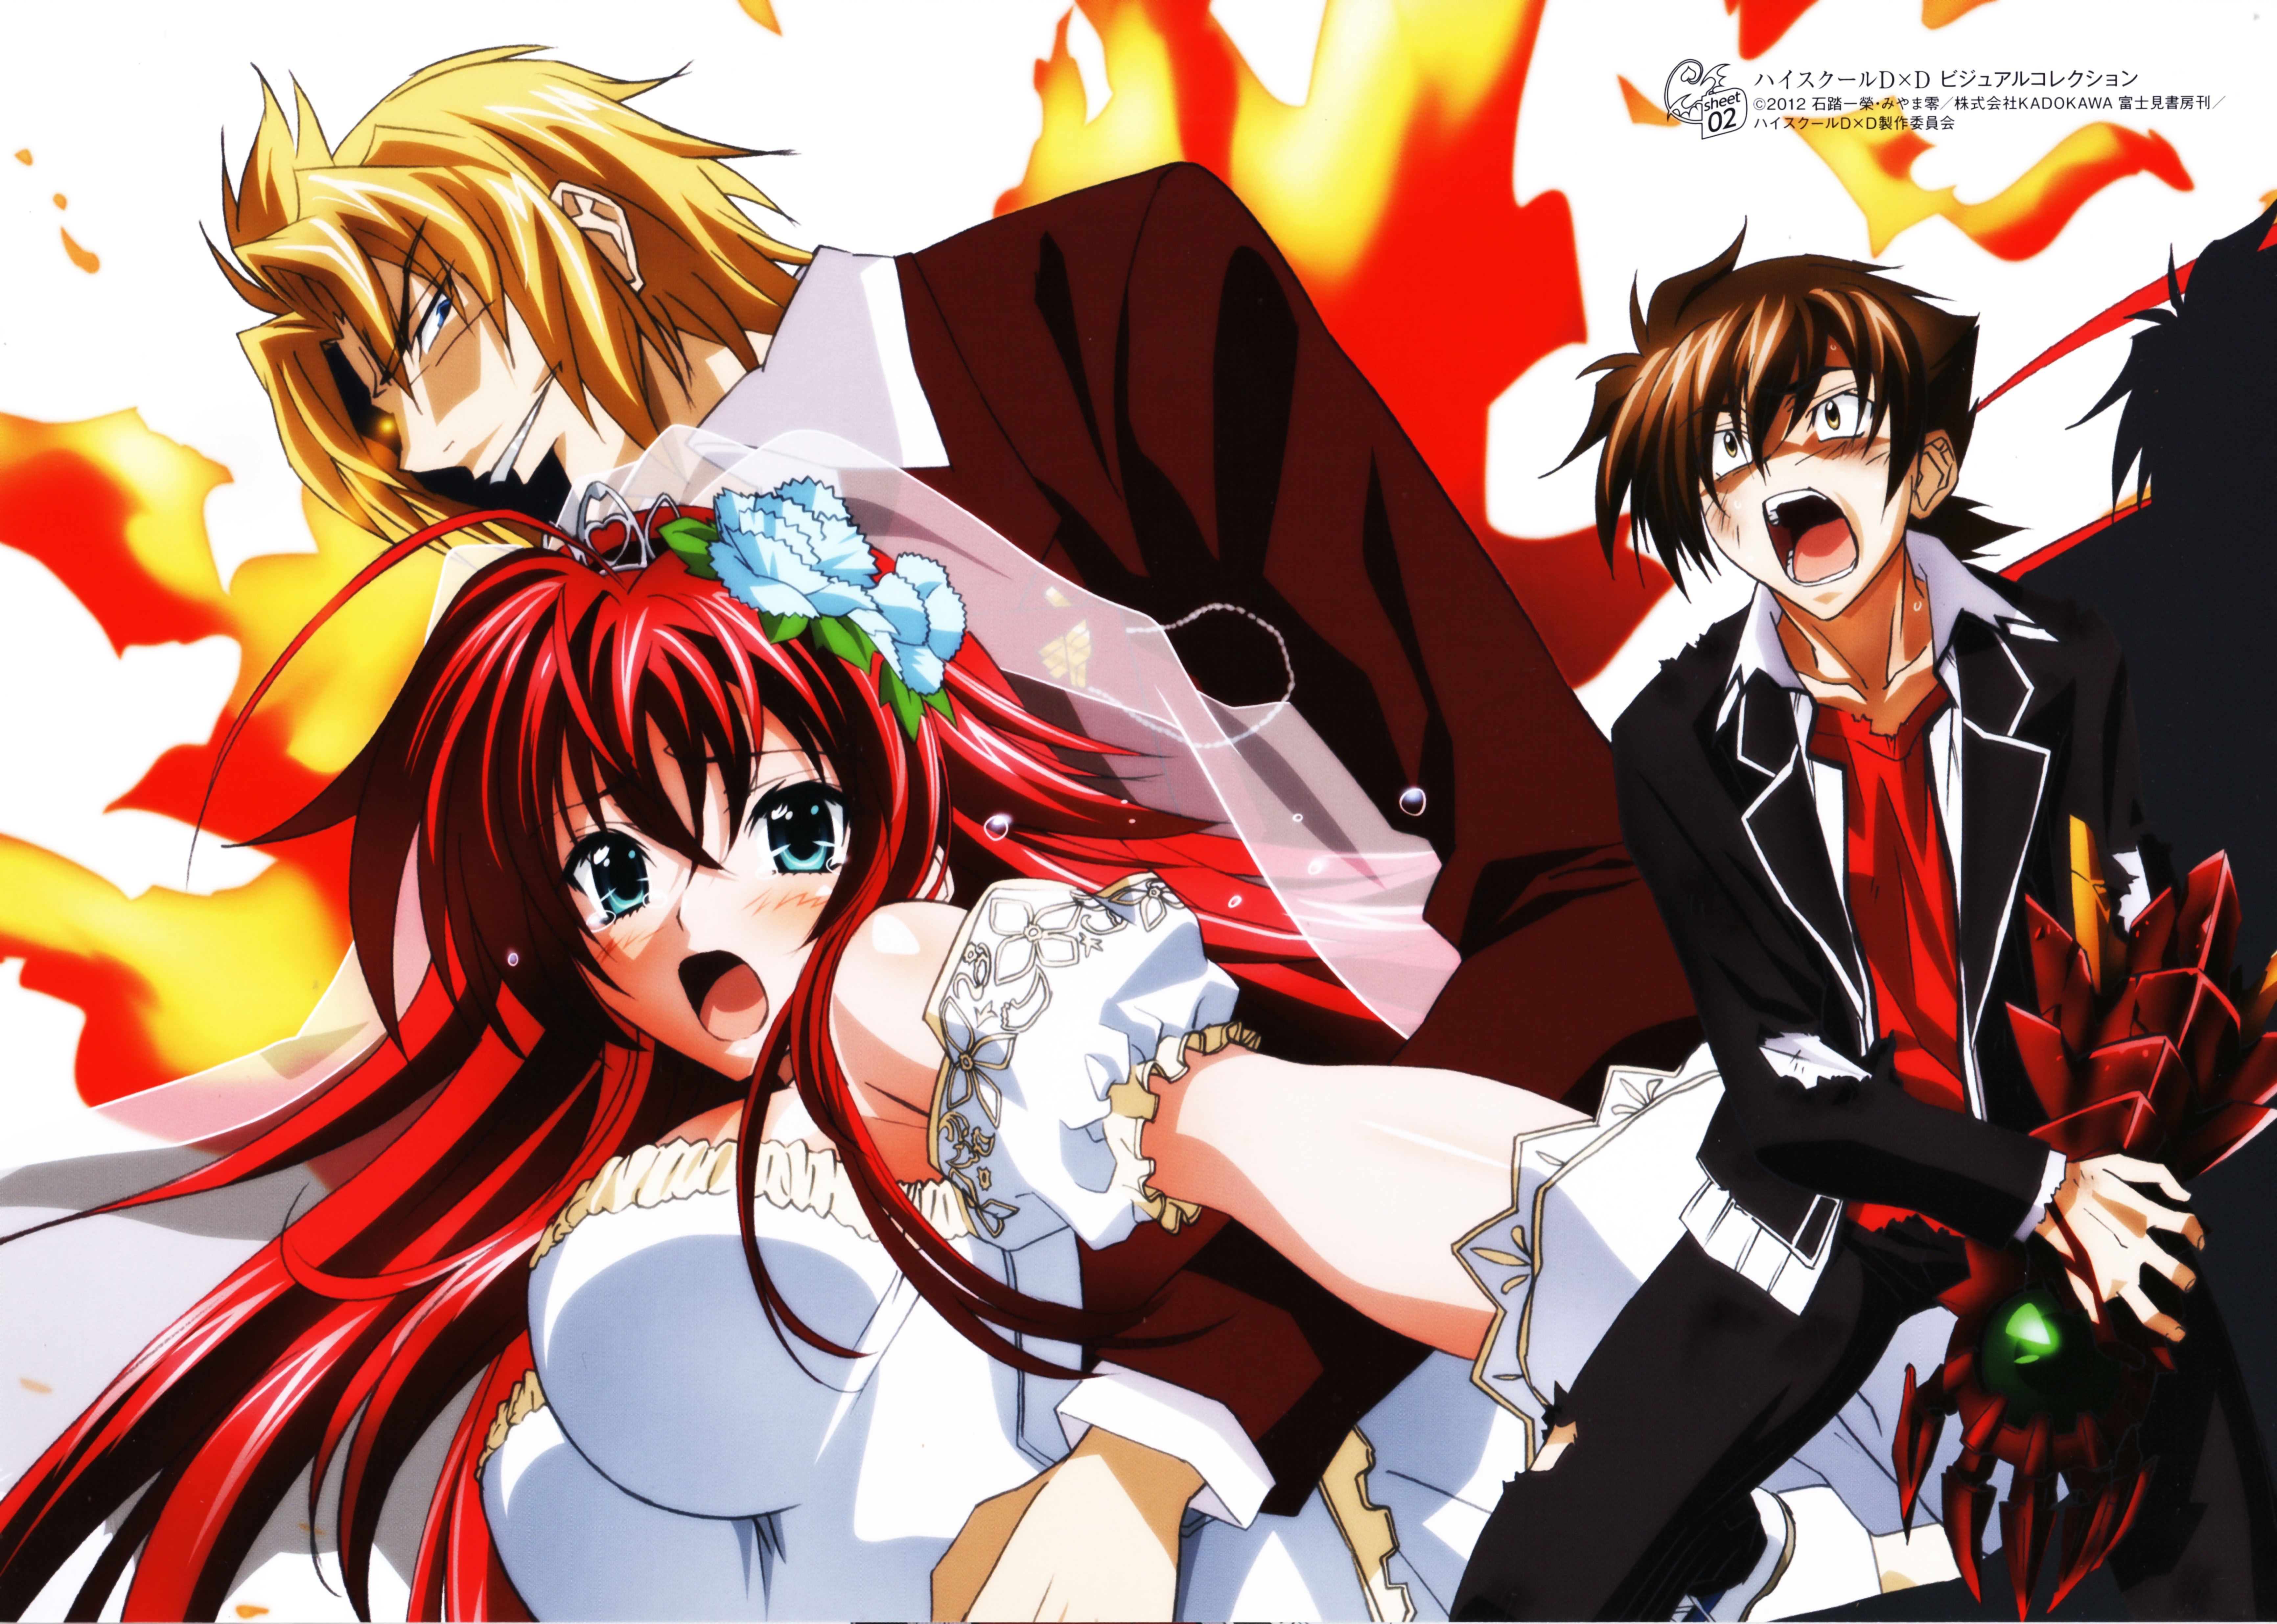 High School DxD picture free for desktop (2019)